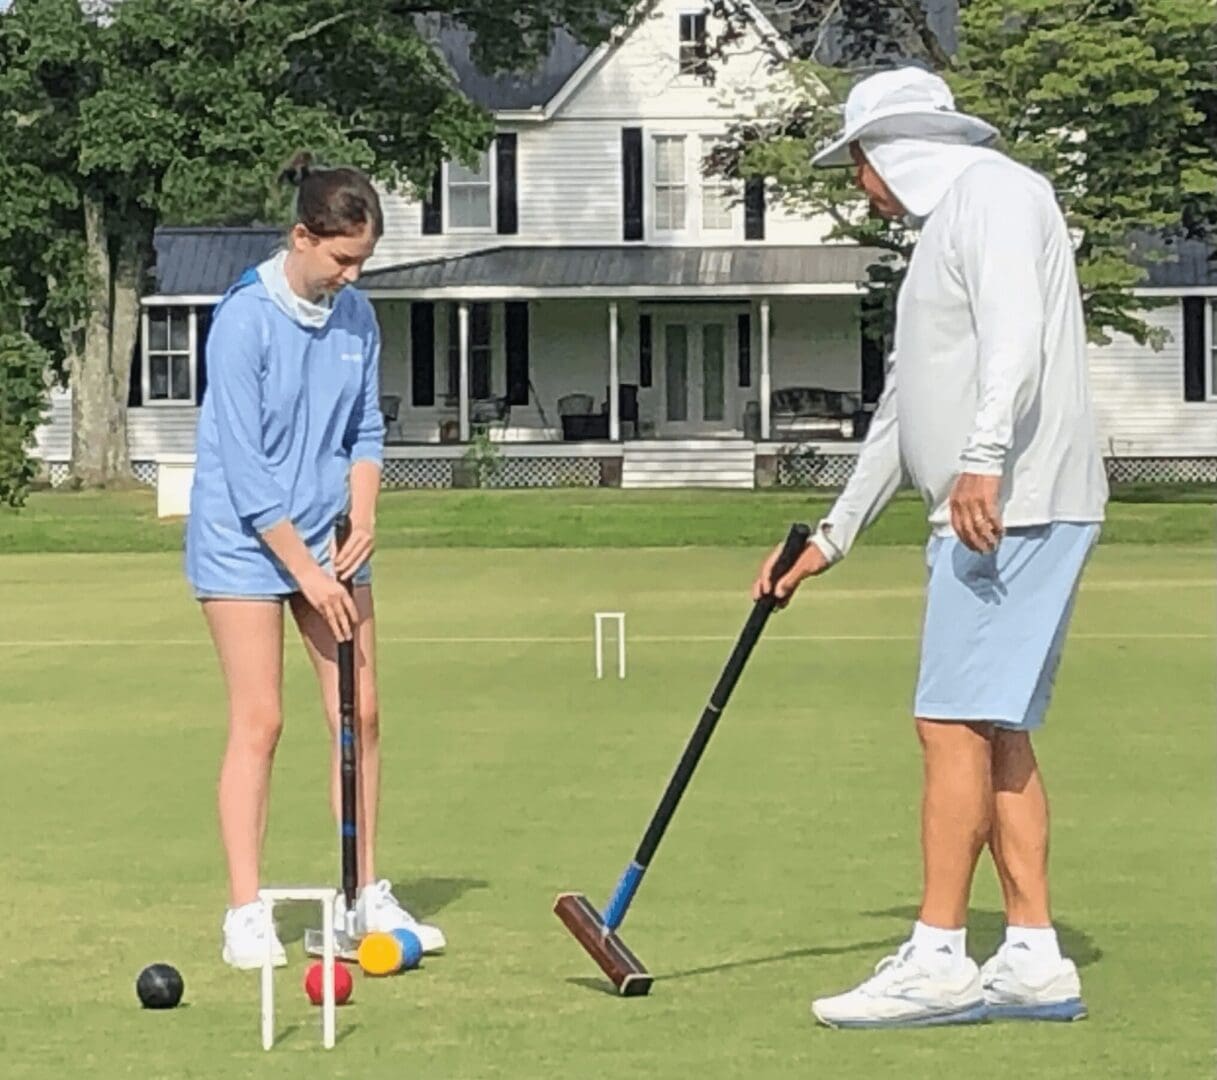 Two people playing croquet on a green lawn.